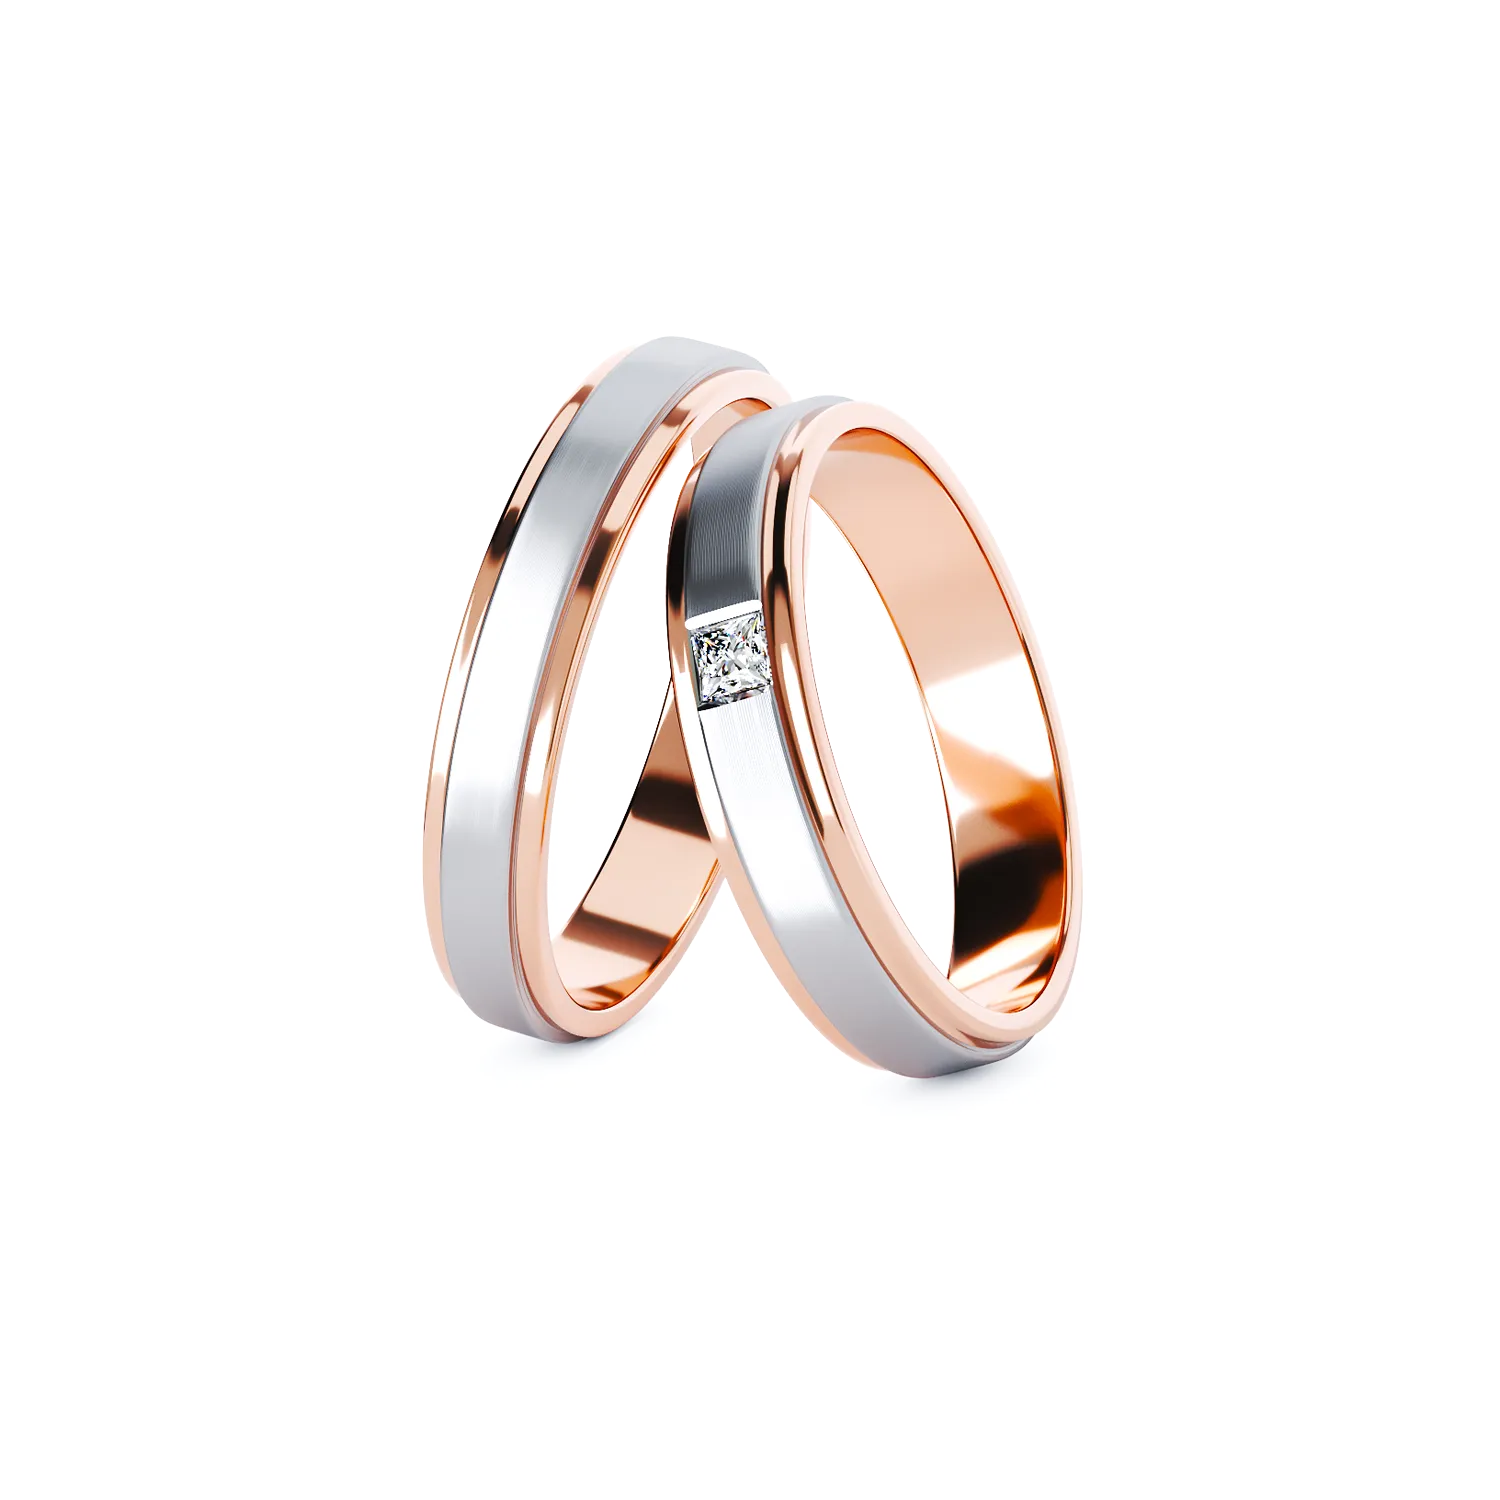 COMELY gold wedding rings